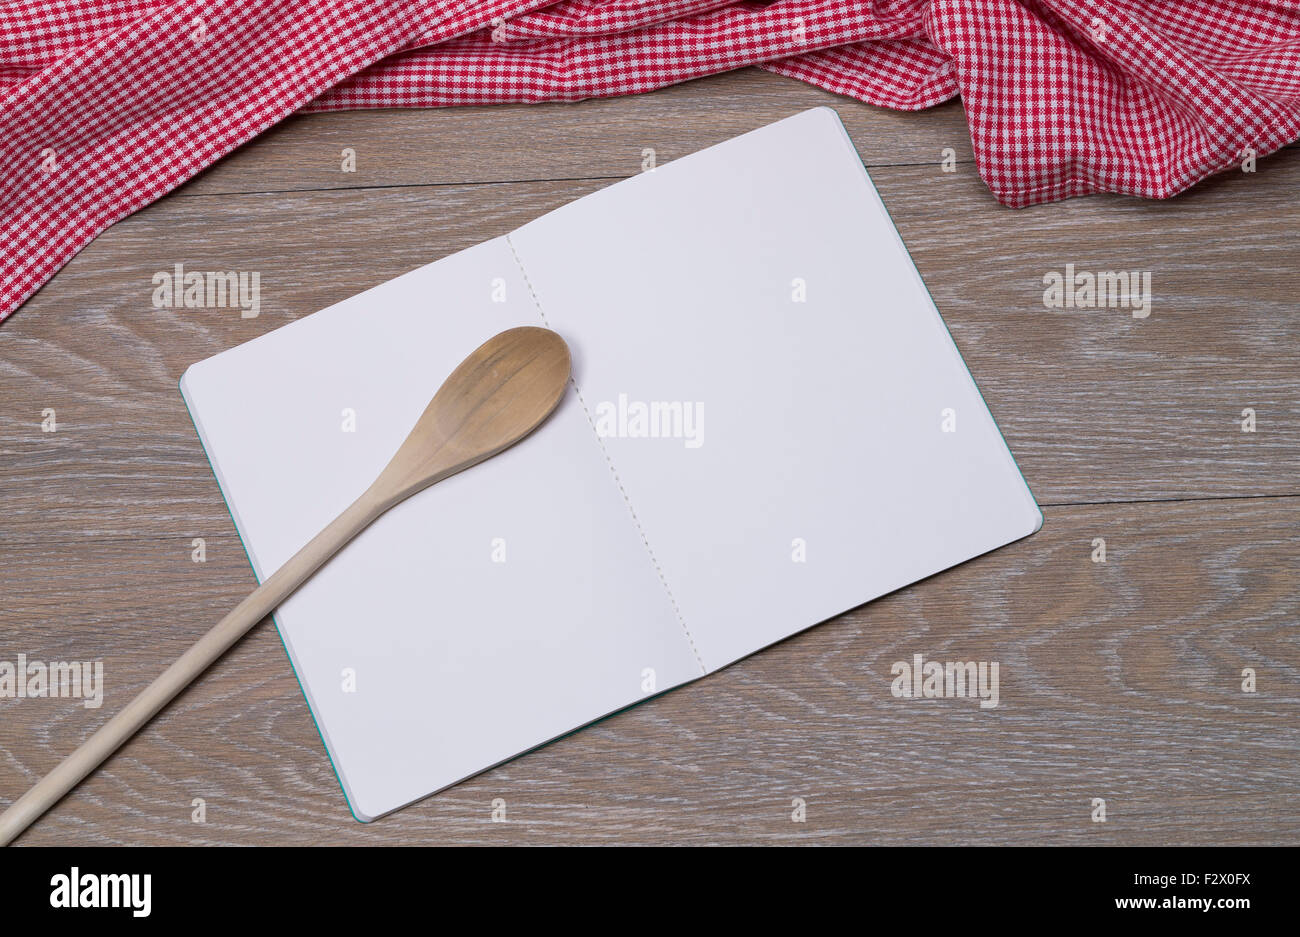 Image shows an open booklet with pen on a vintage table Stock Photo